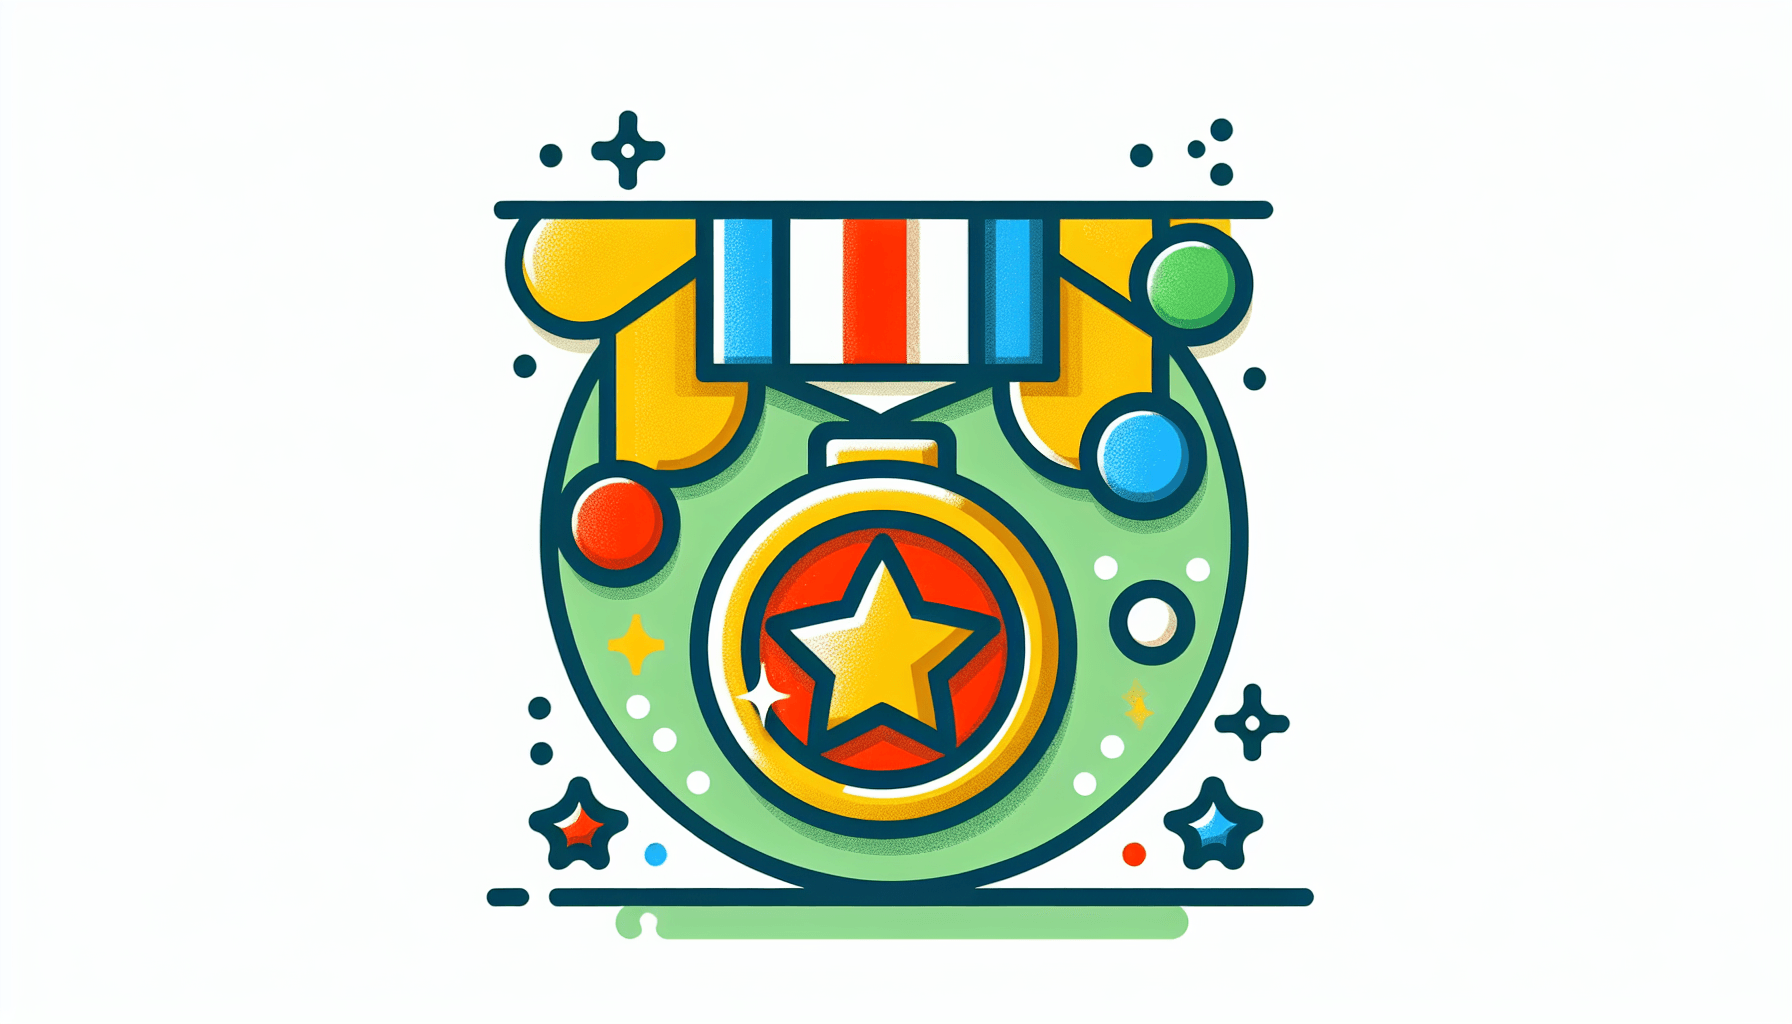 Medal in flat illustration style and white background, red #f47574, green #88c7a8, yellow #fcc44b, and blue #645bc8 colors.